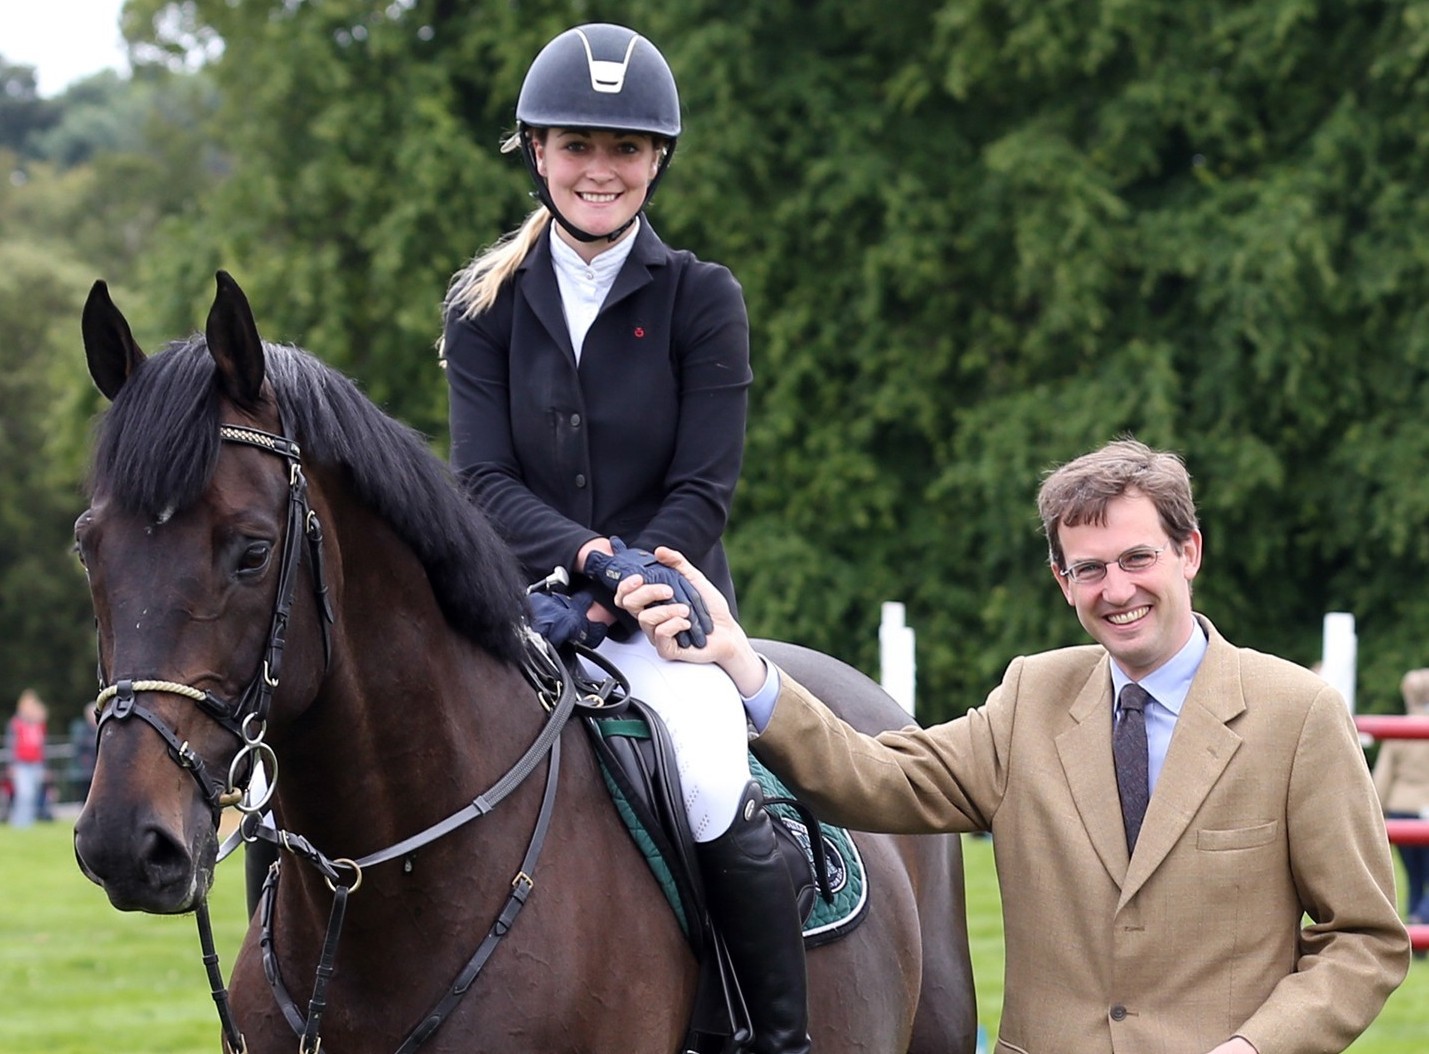 Lucy Guild being presented 1st Prize and the red rossette by Lord Hopetoun after winning the  the show jumping grand prix at Hopetoun Intenational Horse Trials on her horse Titi D’Oase